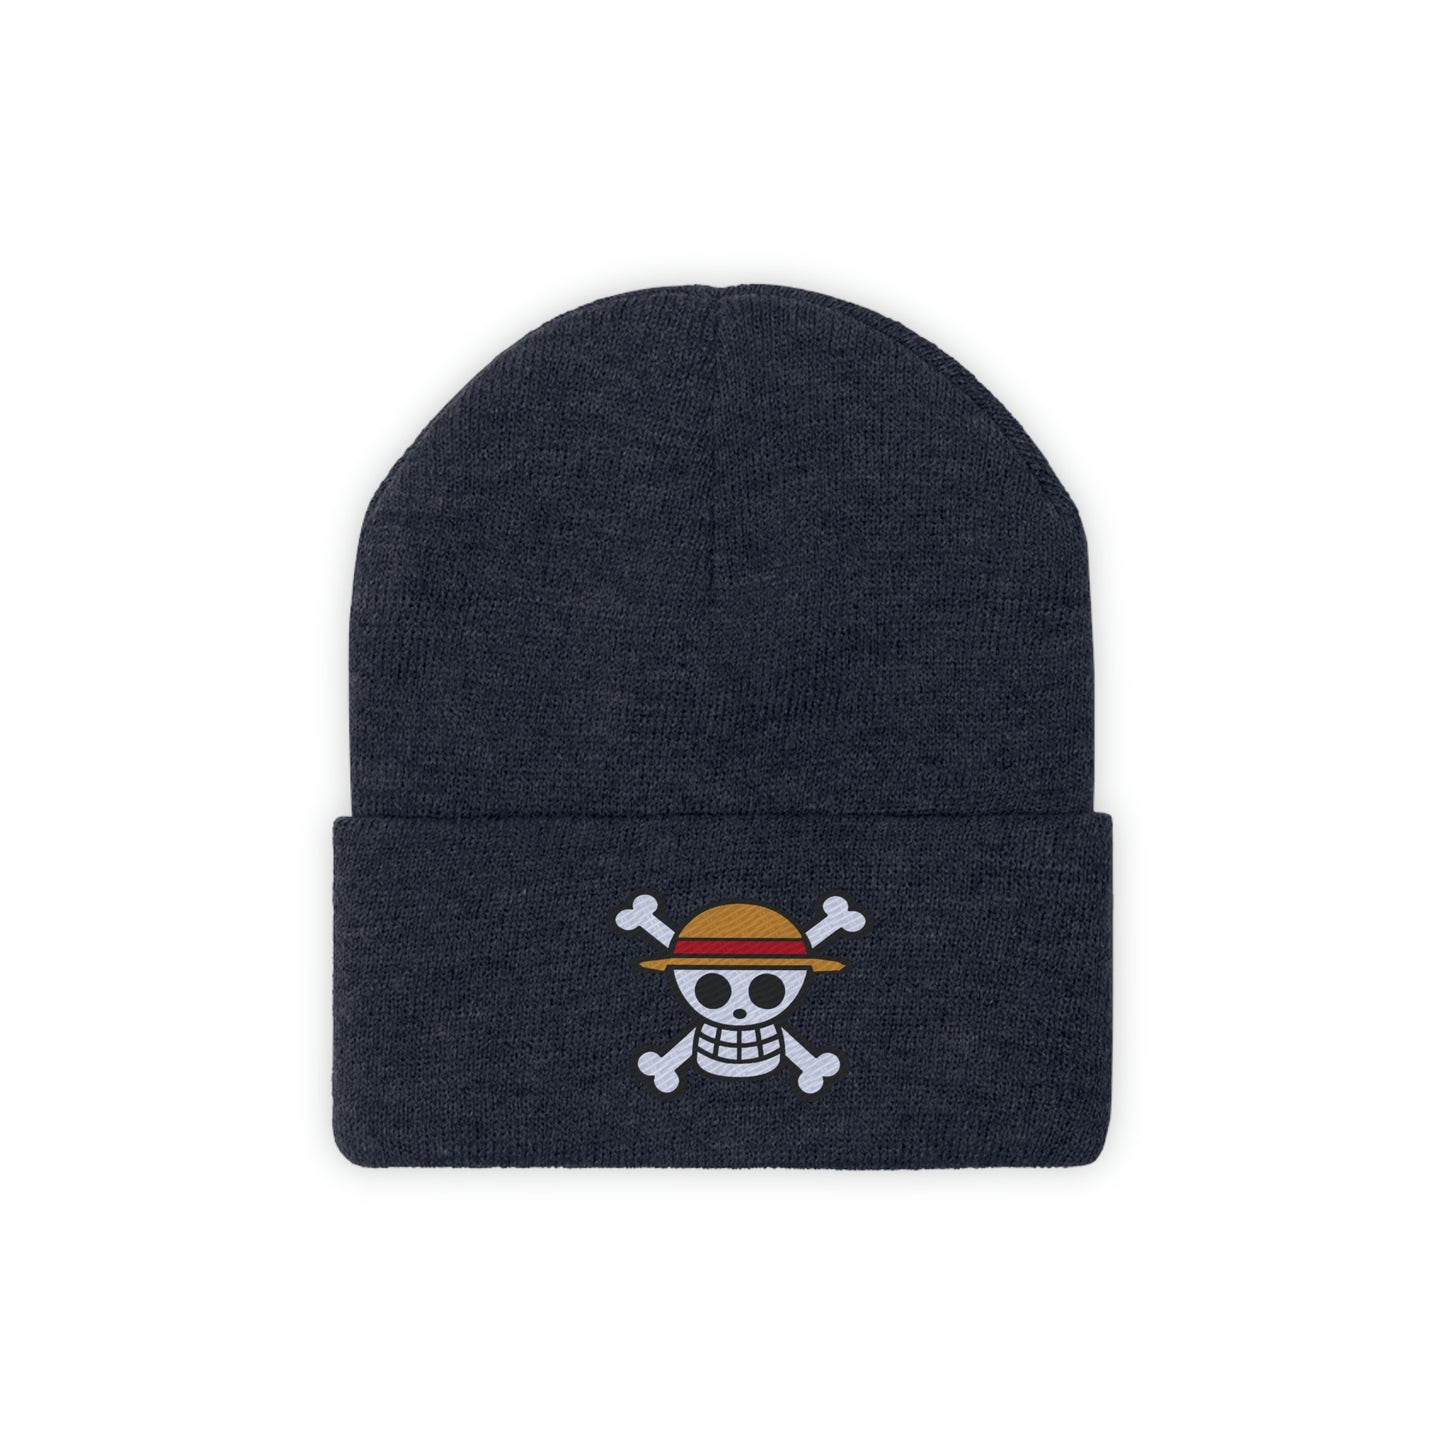 Straw hats Embroidered Pirates Anime Symbol Beanie